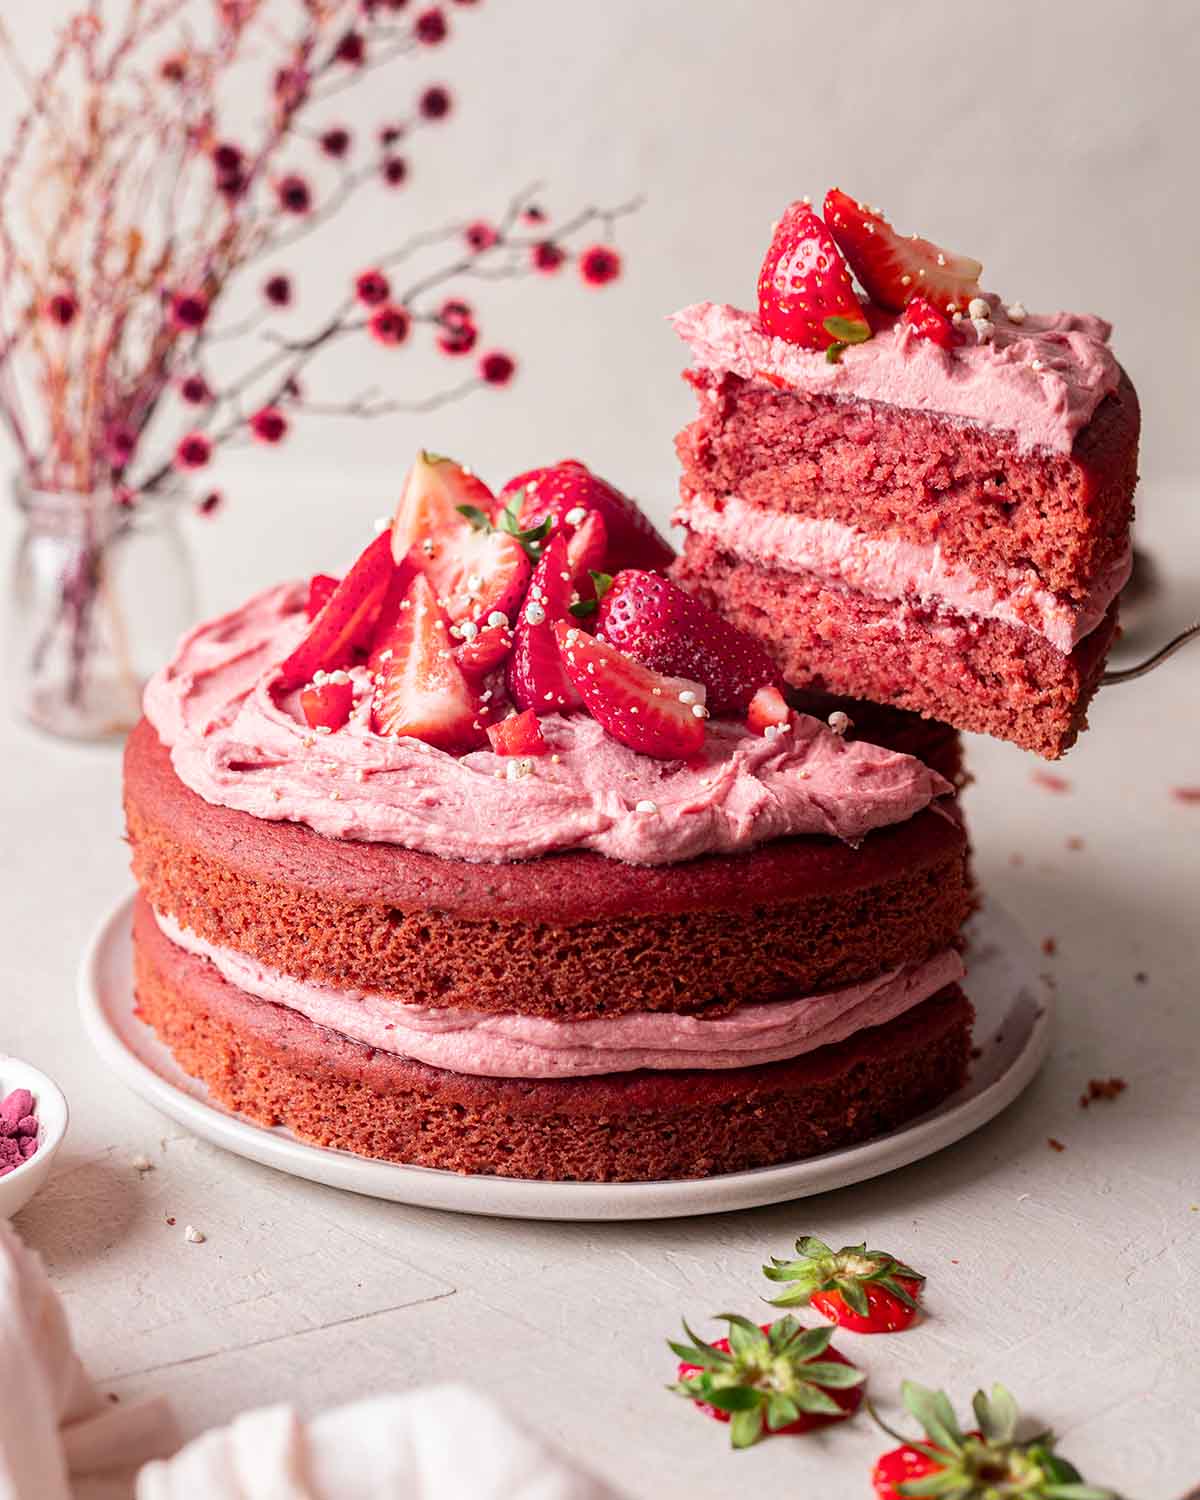 Vegan strawberry cake on plate with slice of cake lifted out revealing fluffy pink texture.